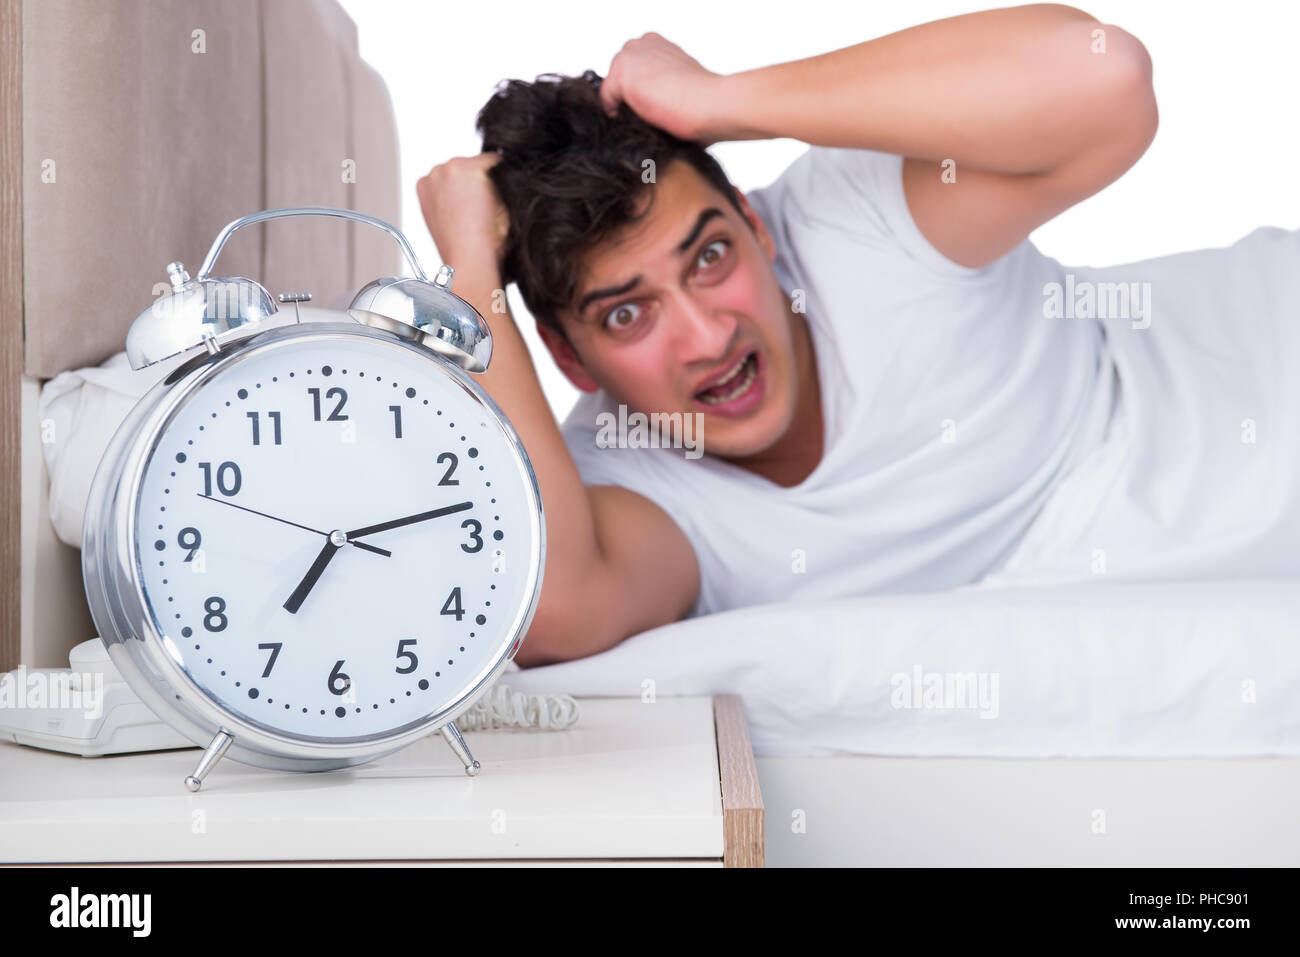 The man in bed suffering from insomnia Stock Photo